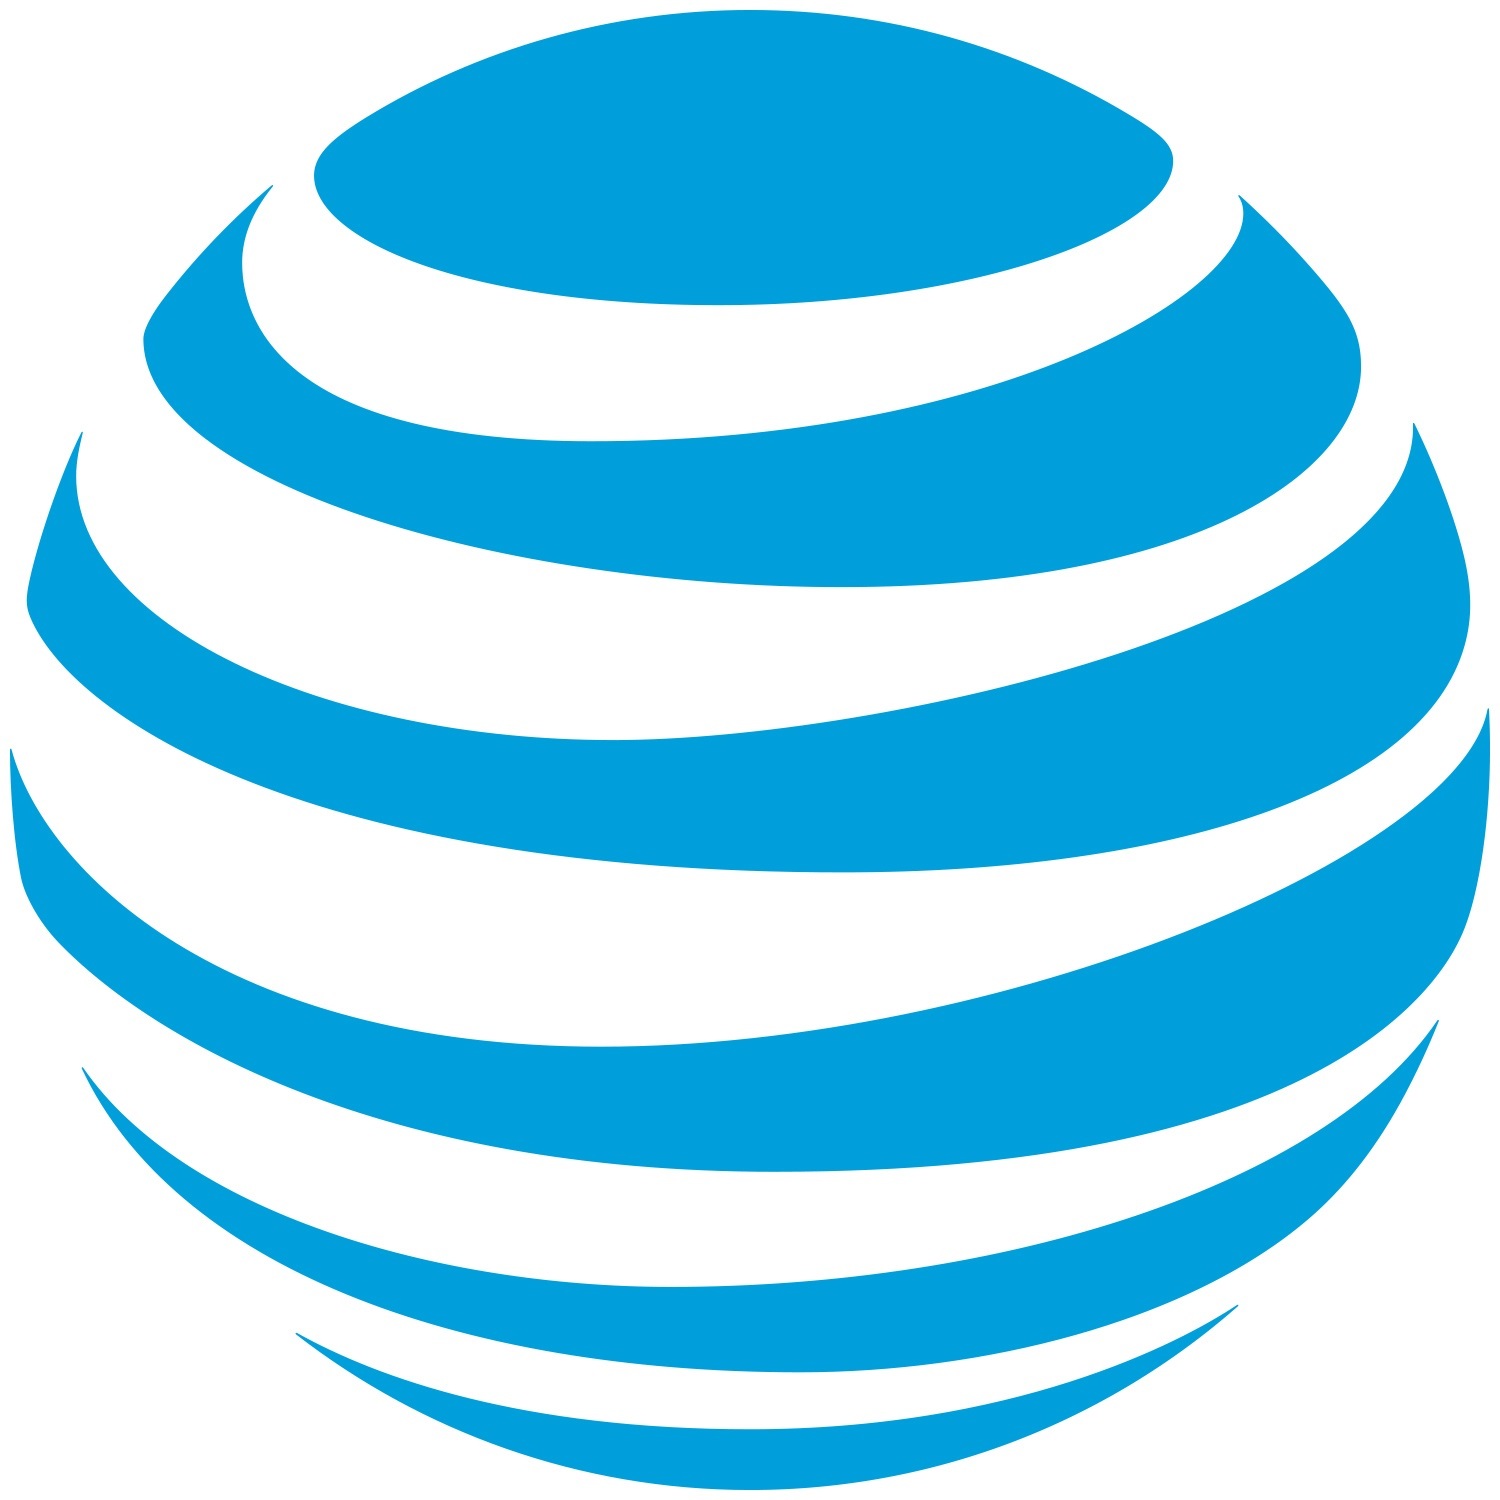 AT&T Partner Exchange Launches Enhancements and Enablement Tools to